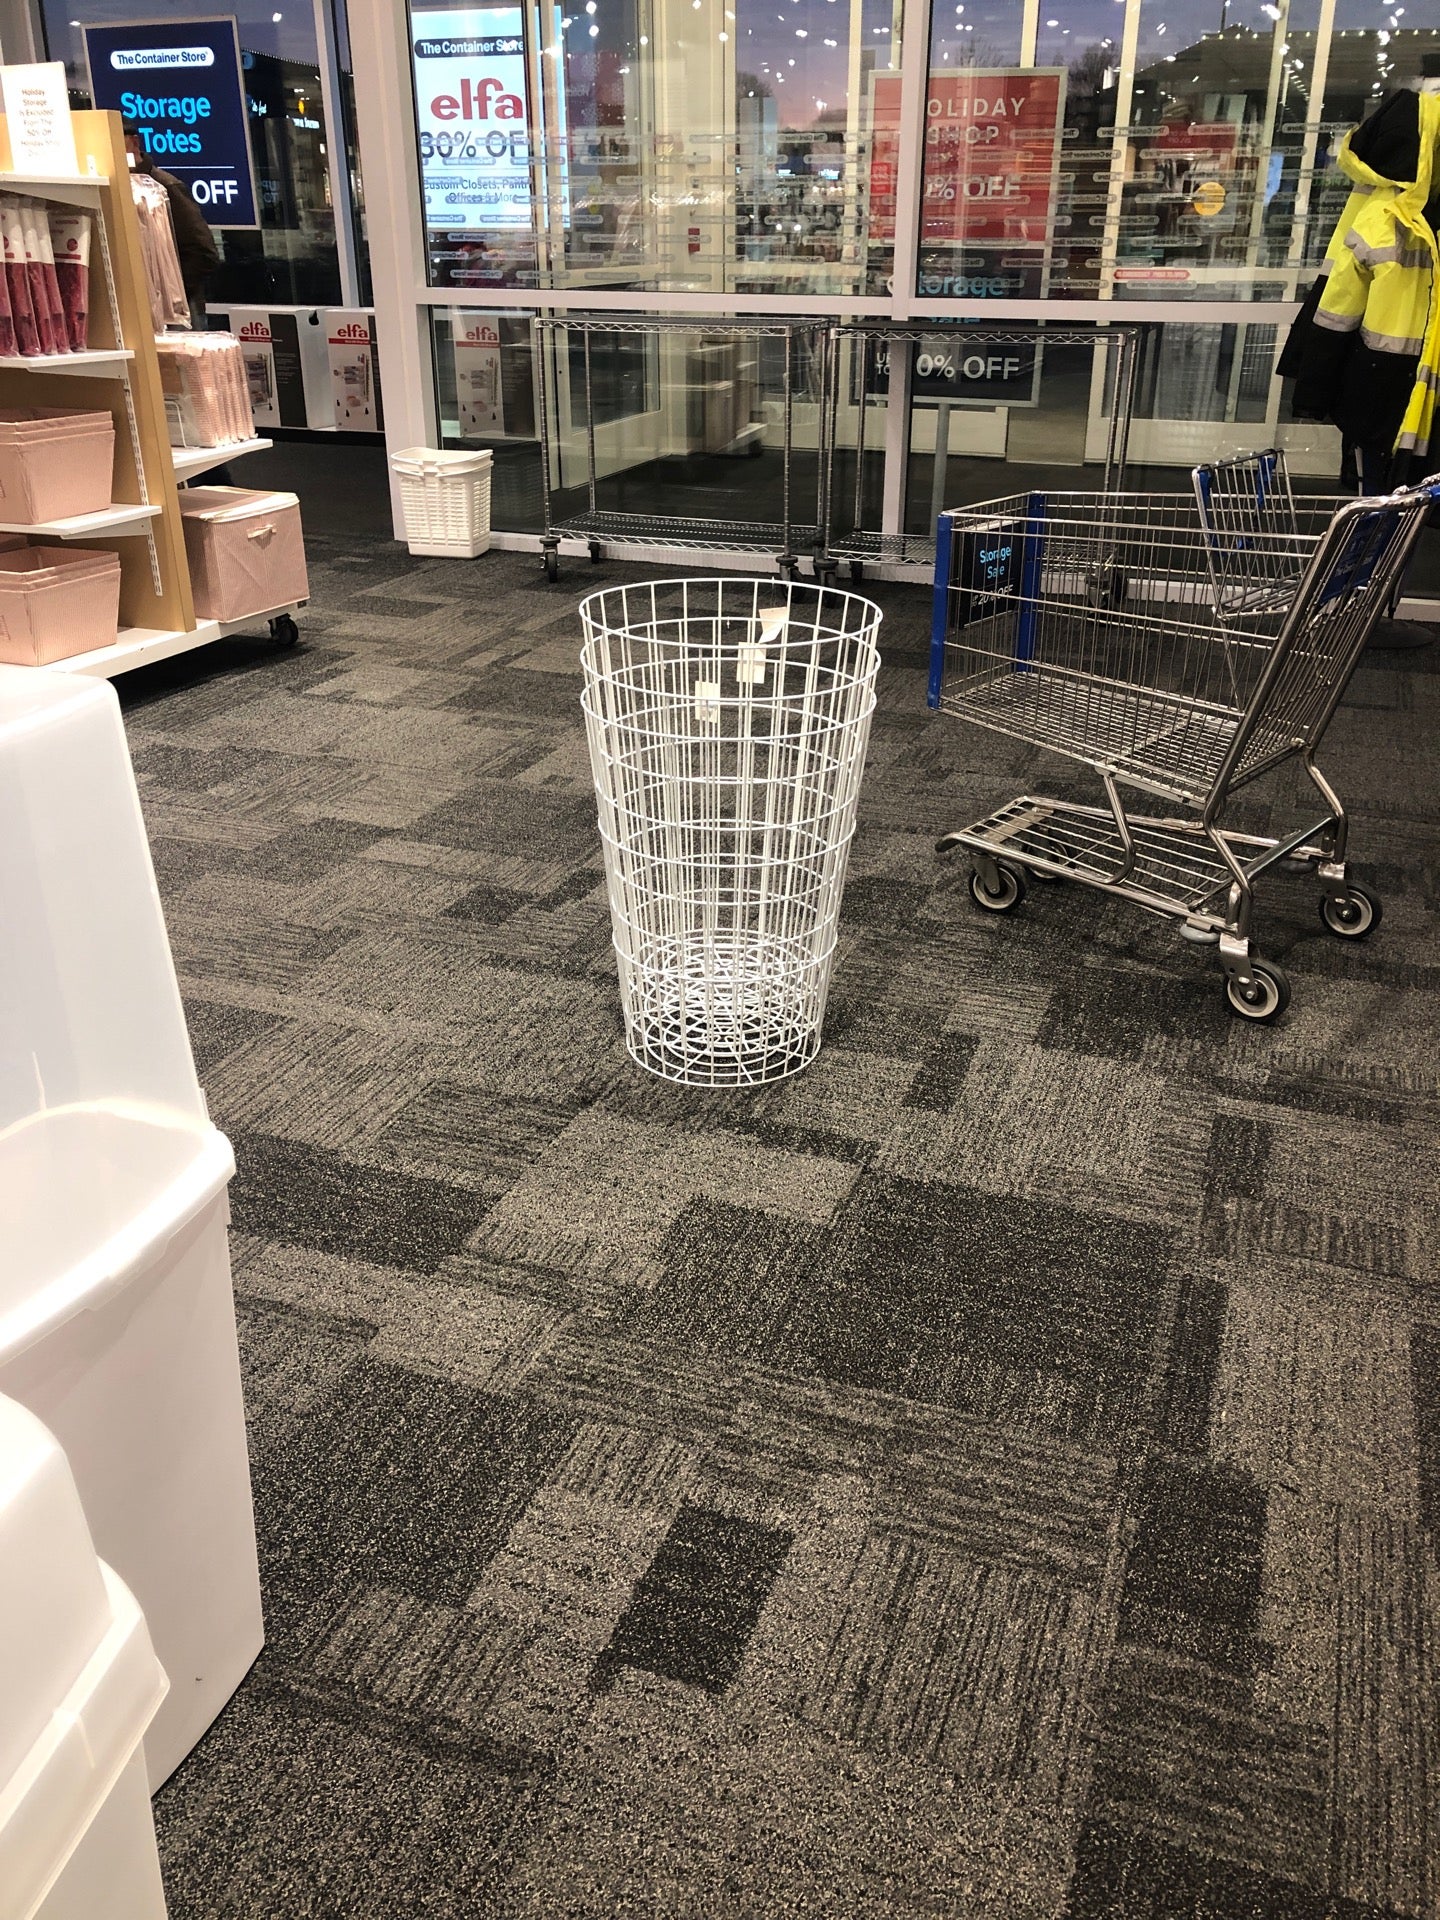 THE CONTAINER STORE - 20 Photos & 17 Reviews - 4701 W 119th St, Overland  Park, Kansas - Home Organization - Phone Number - Yelp